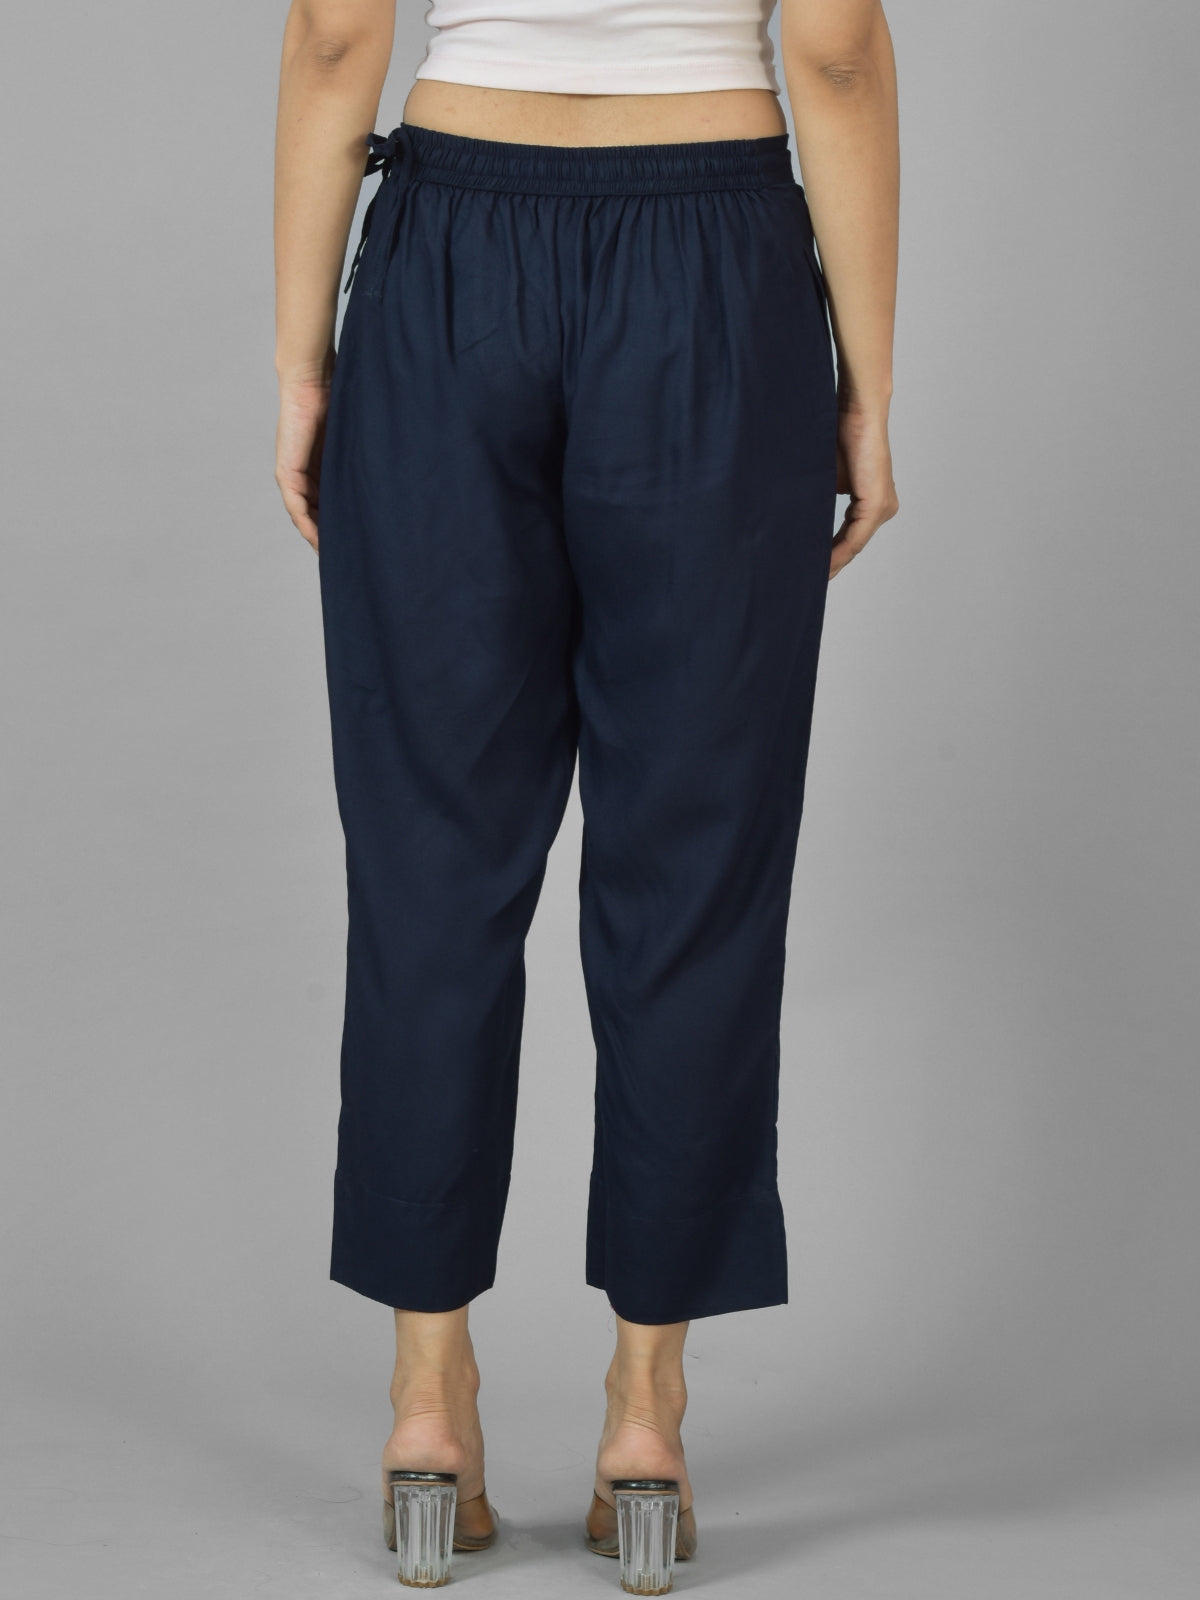 Pack Of 2 Womens Navy Blue And Wine Ankle Length Rayon Culottes Trouser Combo